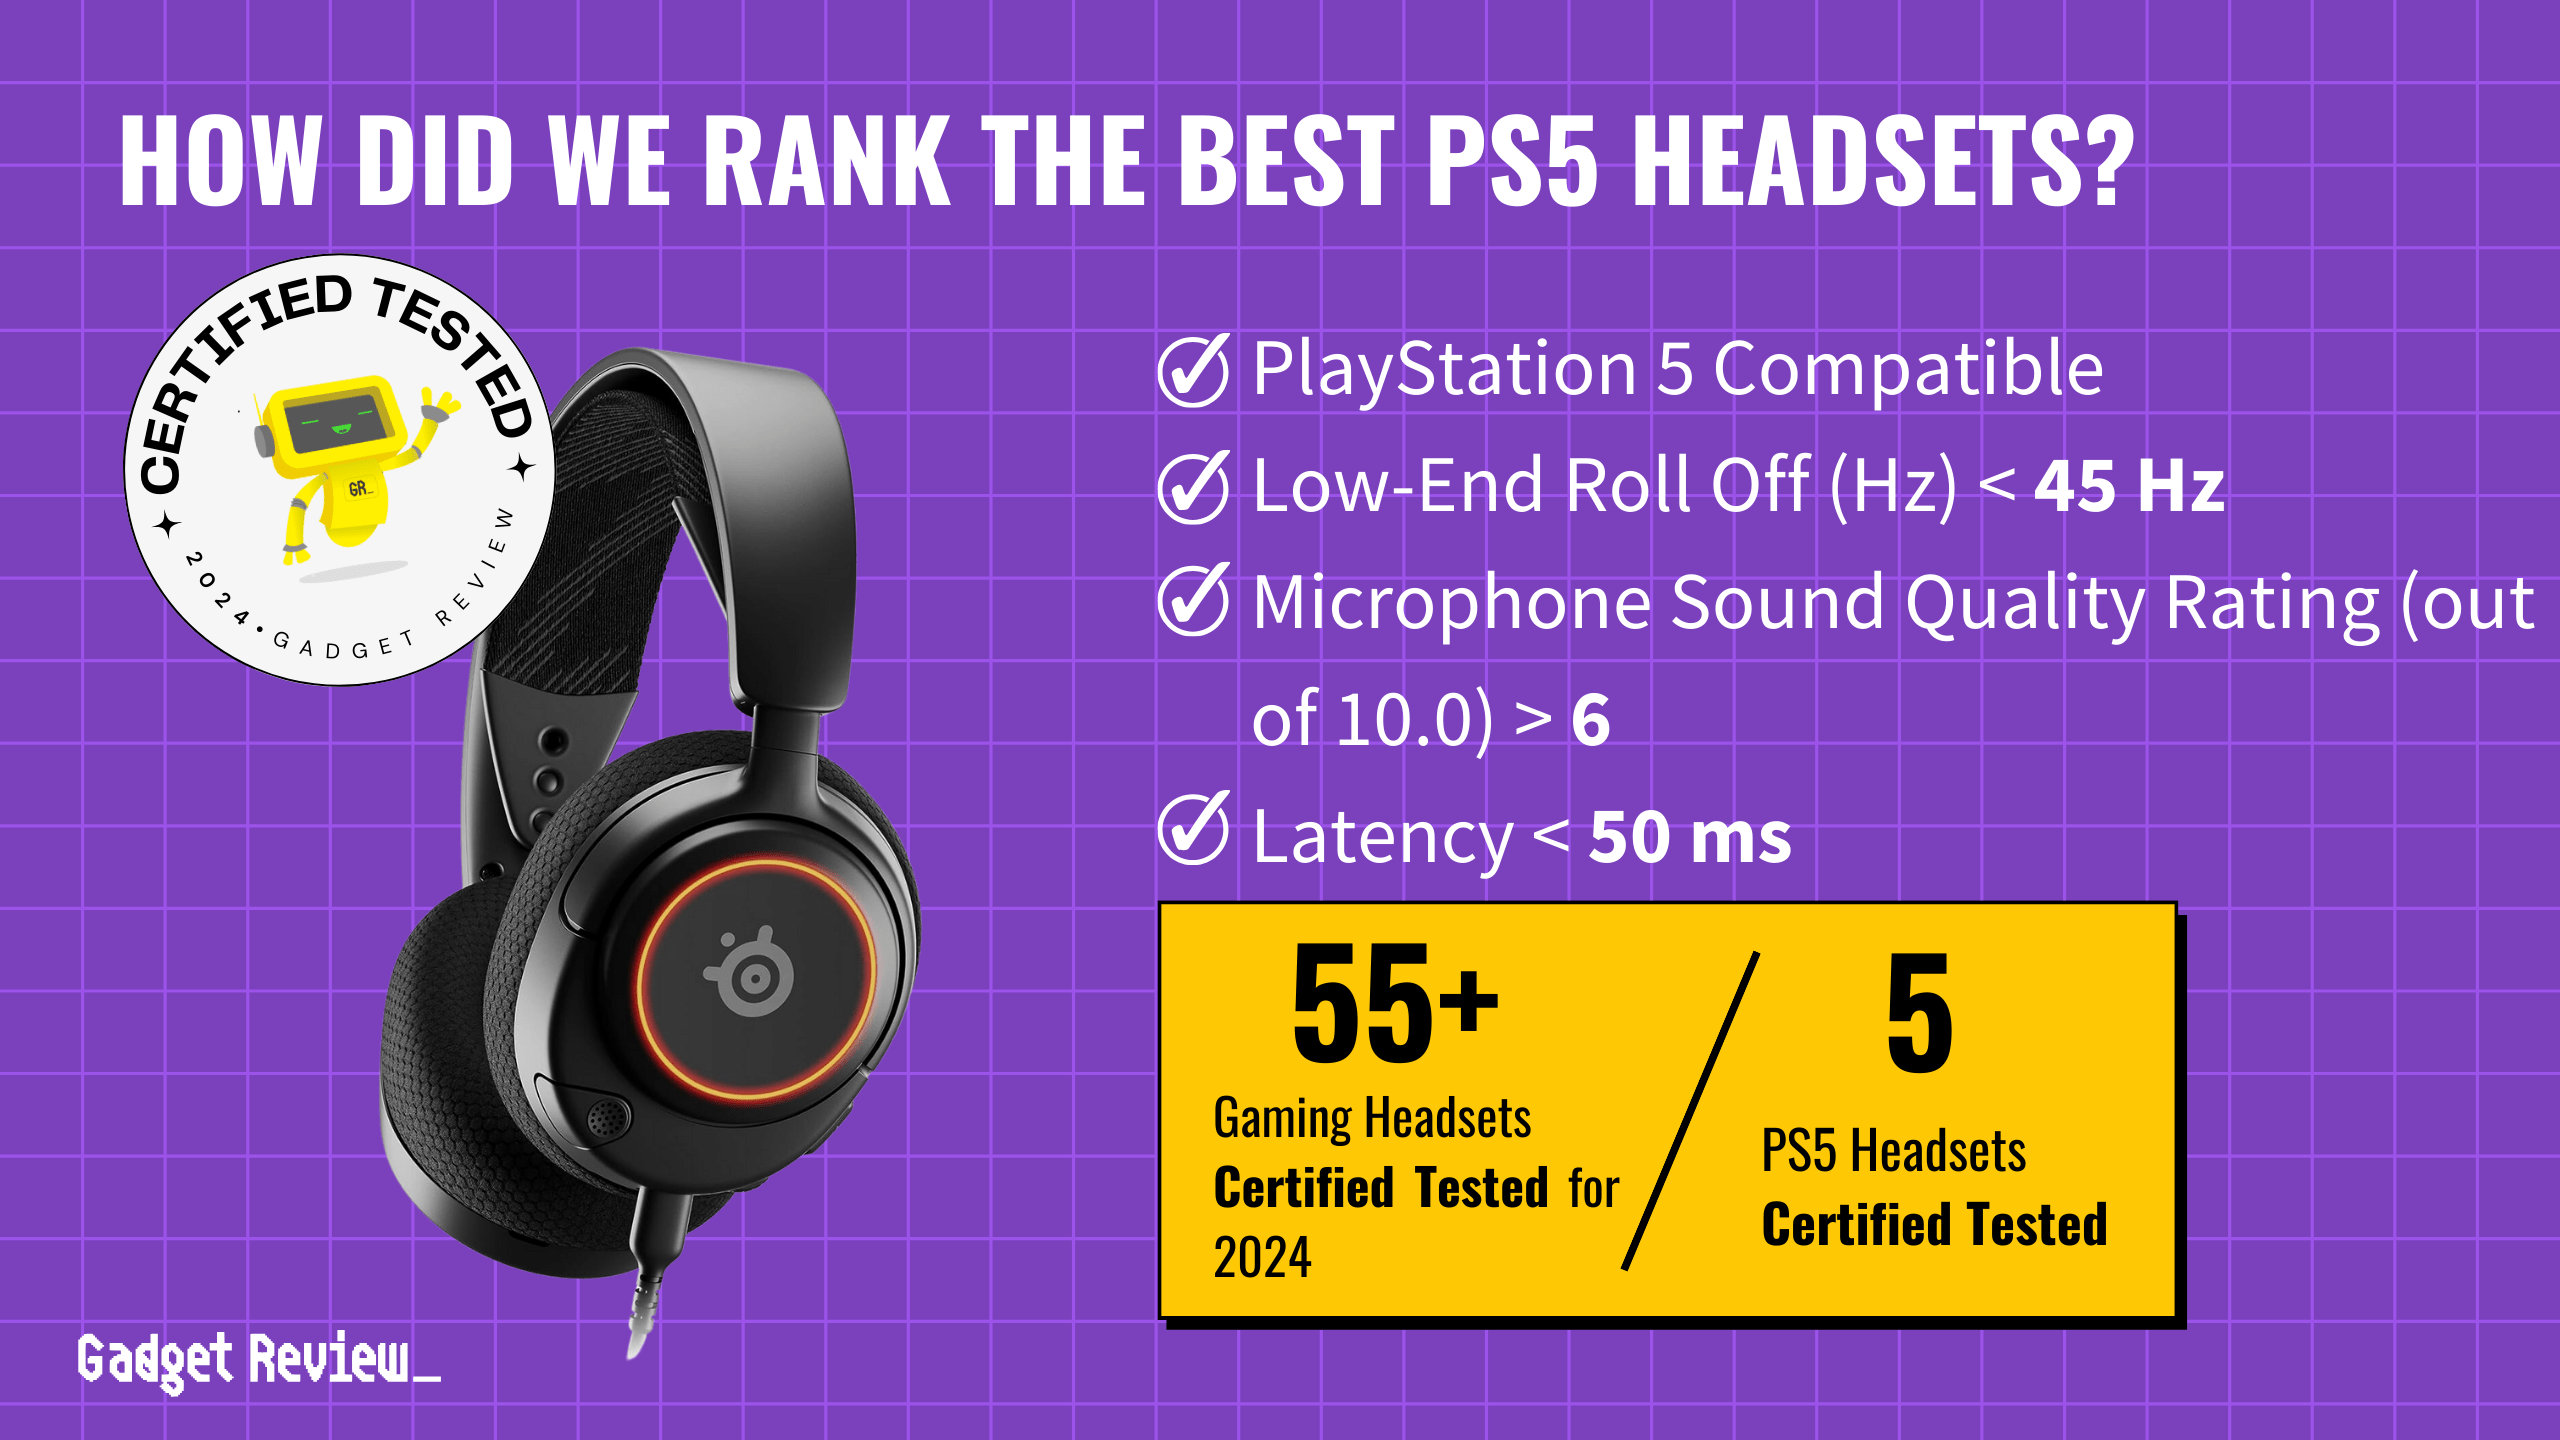 best ps5 headset guide that shows the top best gaming headset model